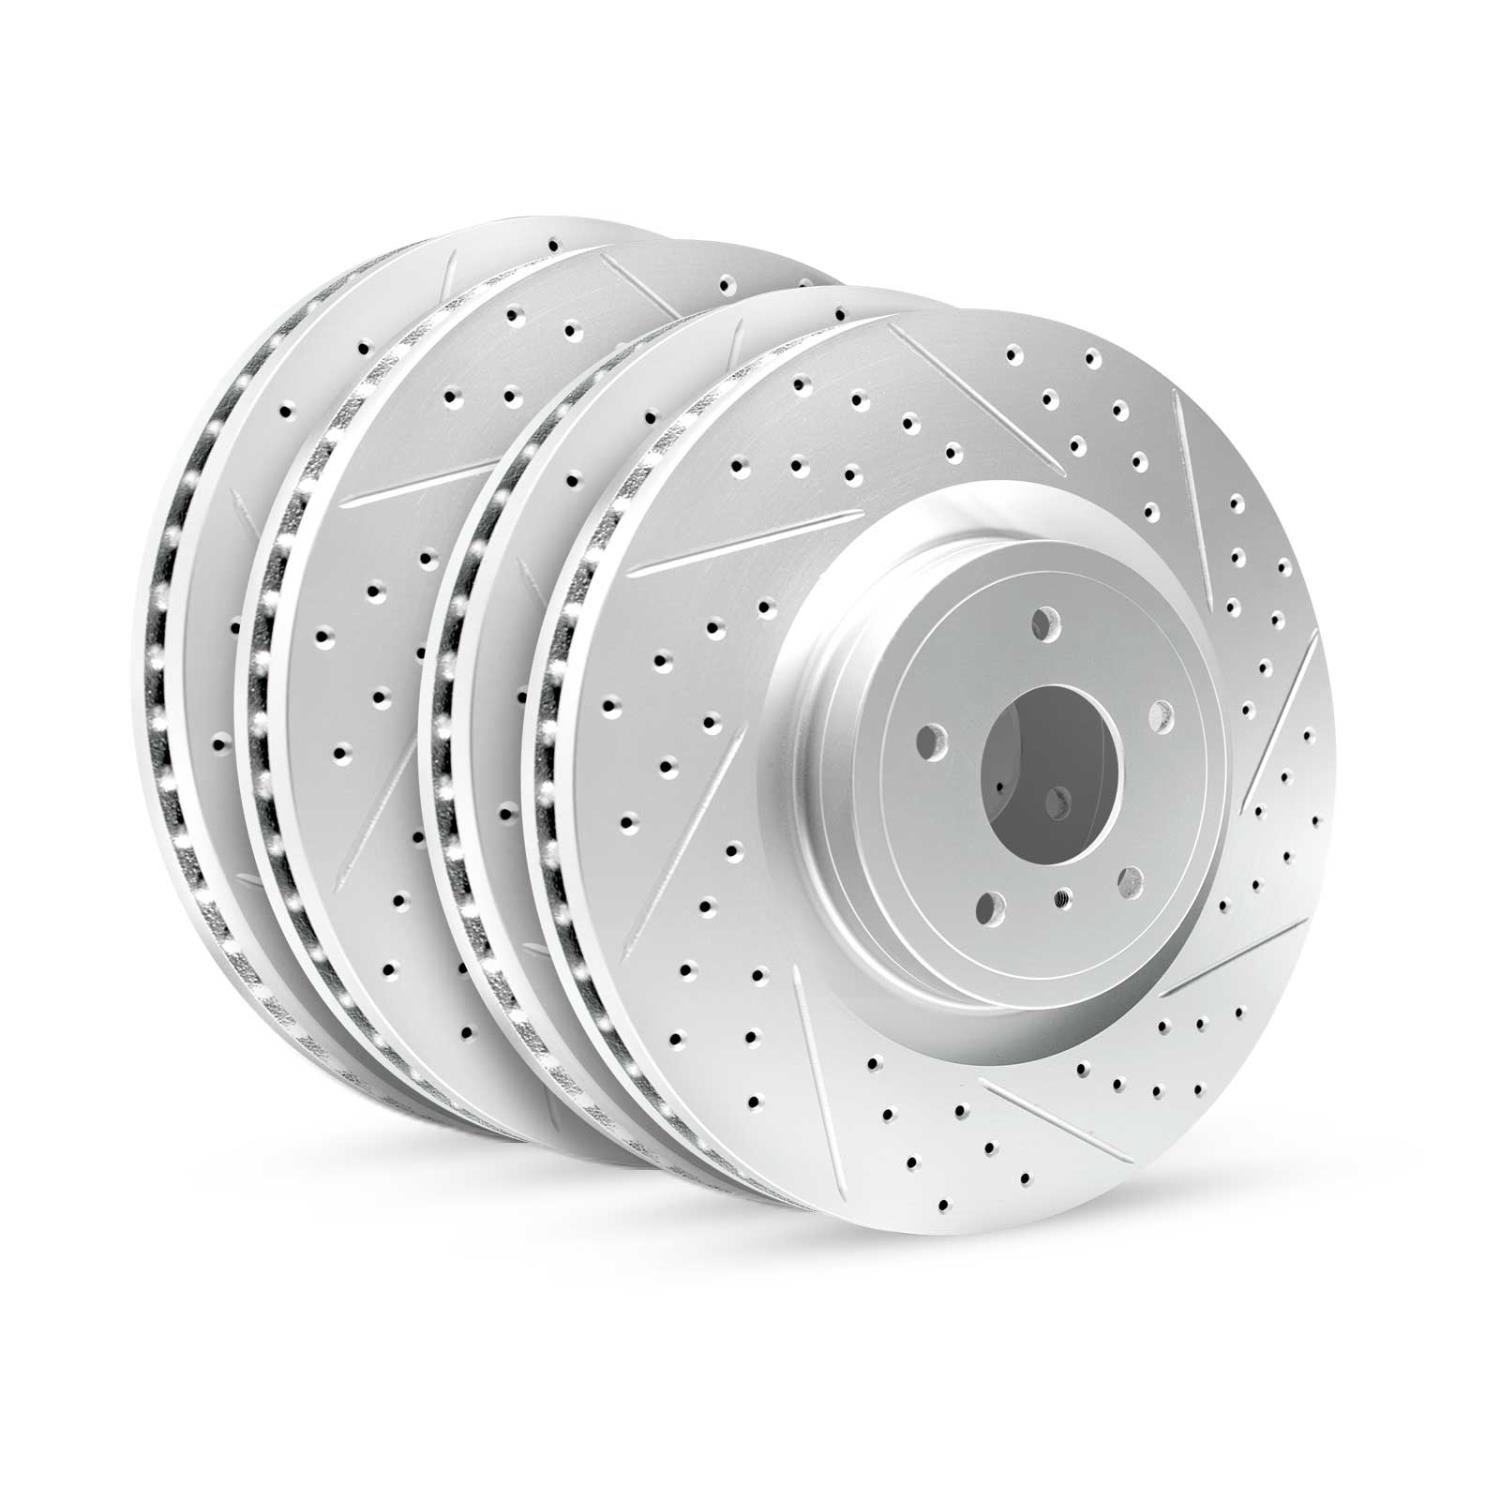 GEO-Carbon Drilled/Slotted Rotors, 2003-2011 Acura/Honda, Position: Front/Rear